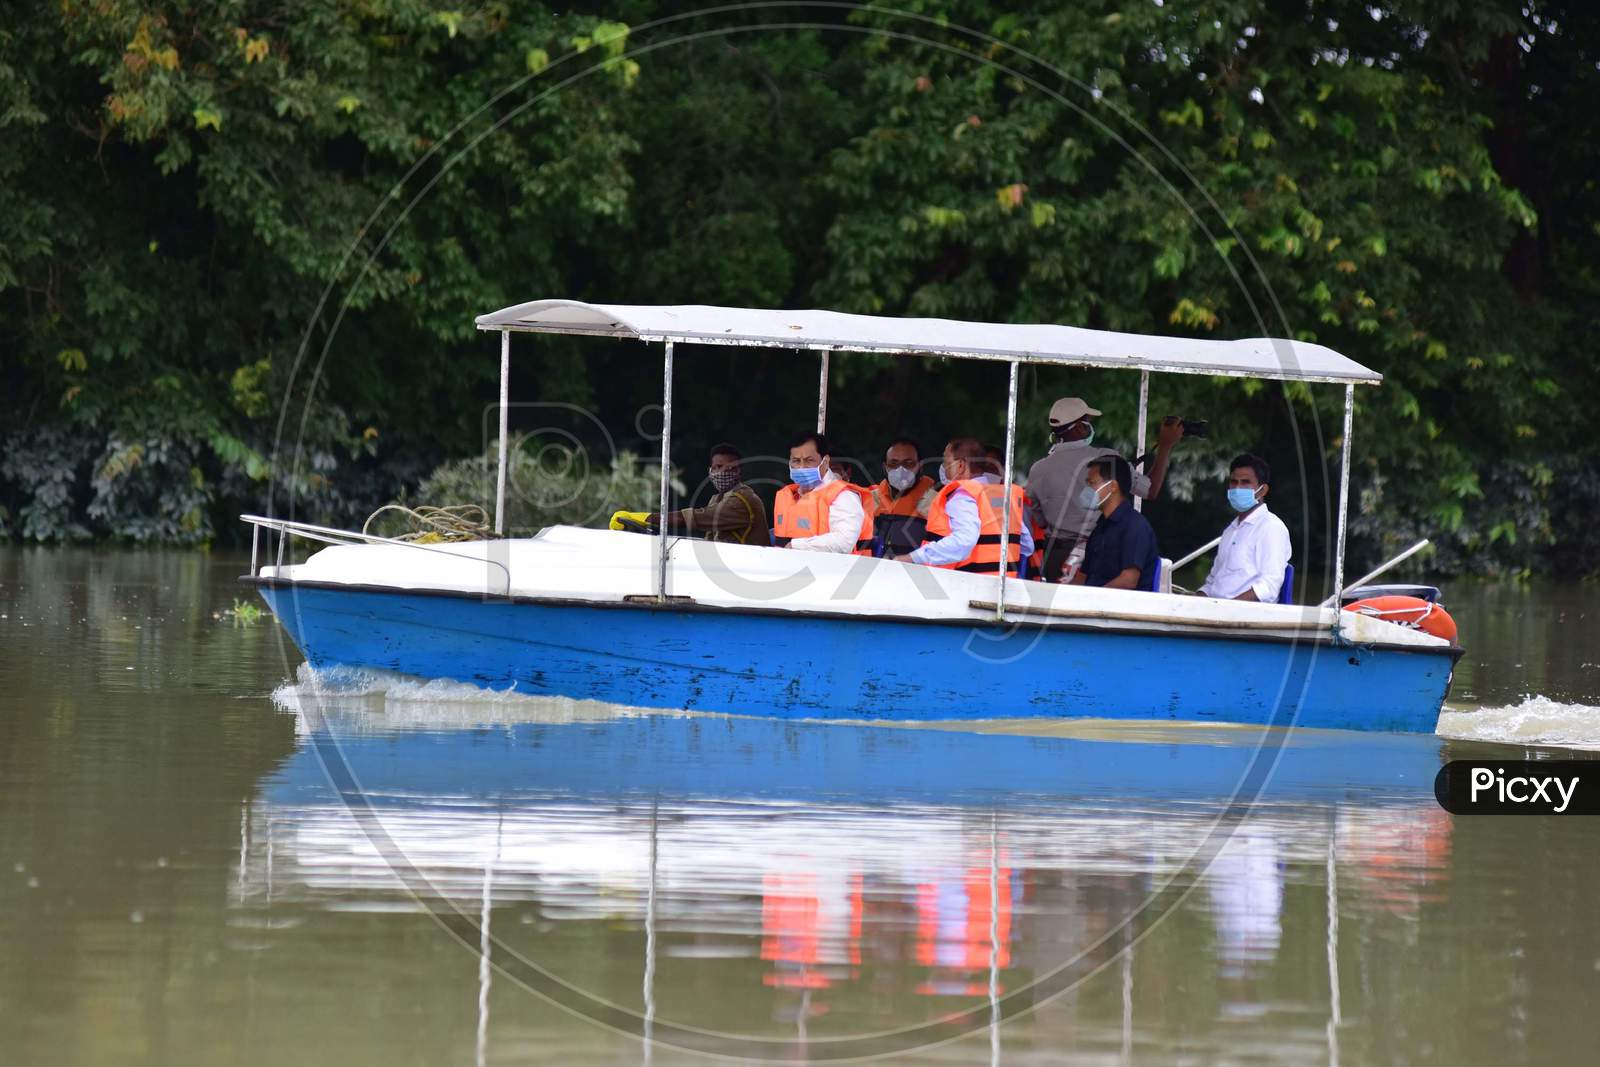 Sarbananda Sonowal, Chief Minister of Assam visits the flood-affected areas of the Kaziranga National Park in Nagaon, Assam on July 16, 2020